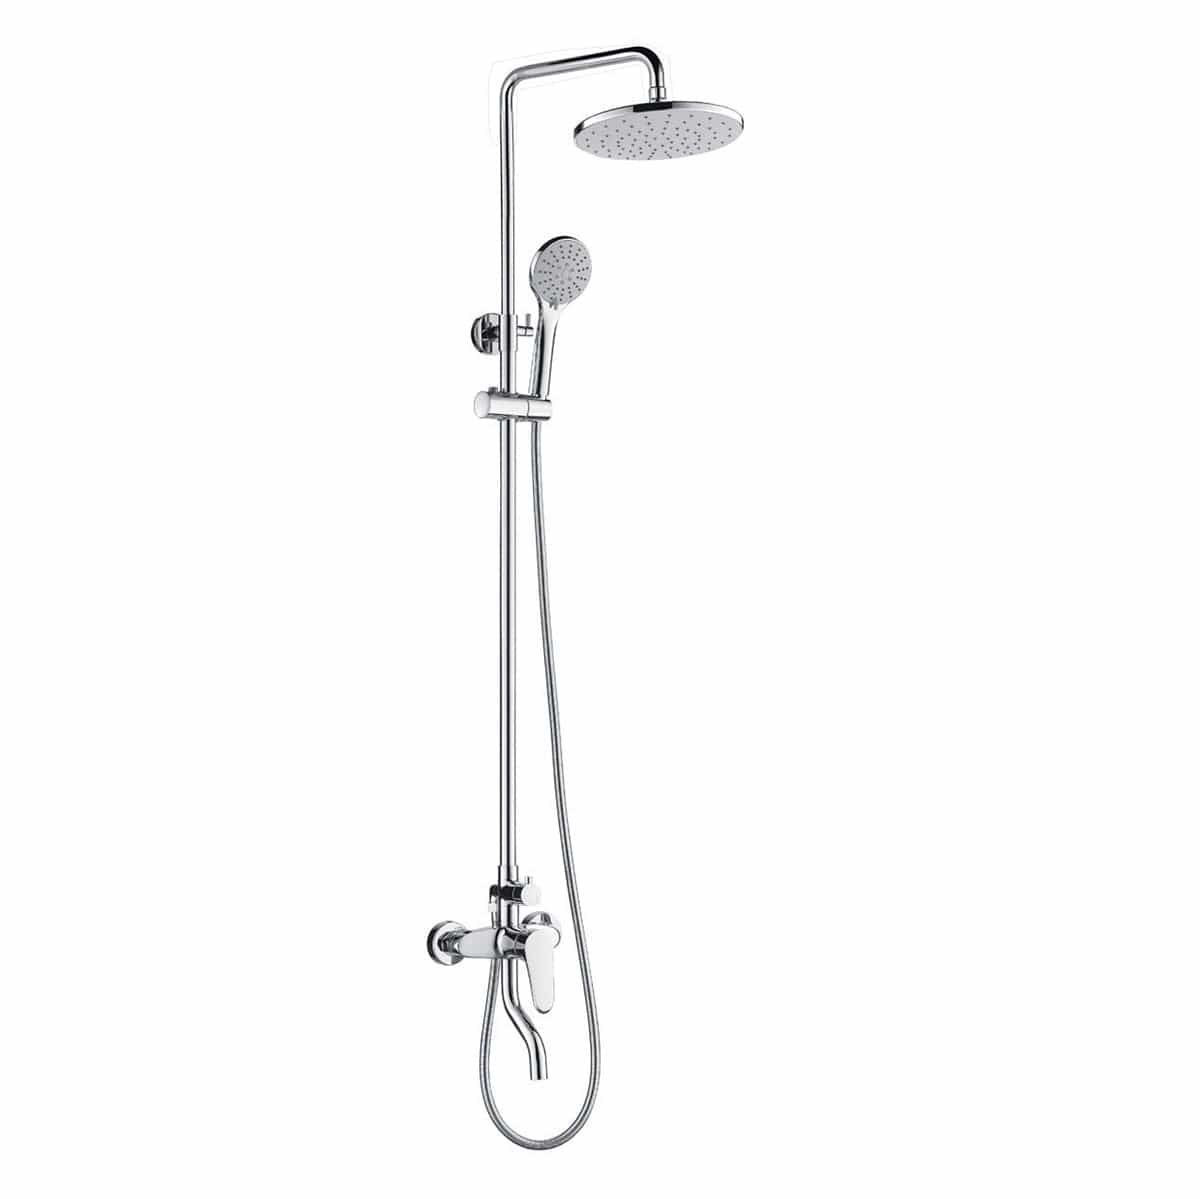 Buy MaxTen 3-in-1 Chrome Hot & Cold Mixer Shower Set - B-9103 | Shop at Supply Master Accra, Ghana Shower Set Buy Tools hardware Building materials